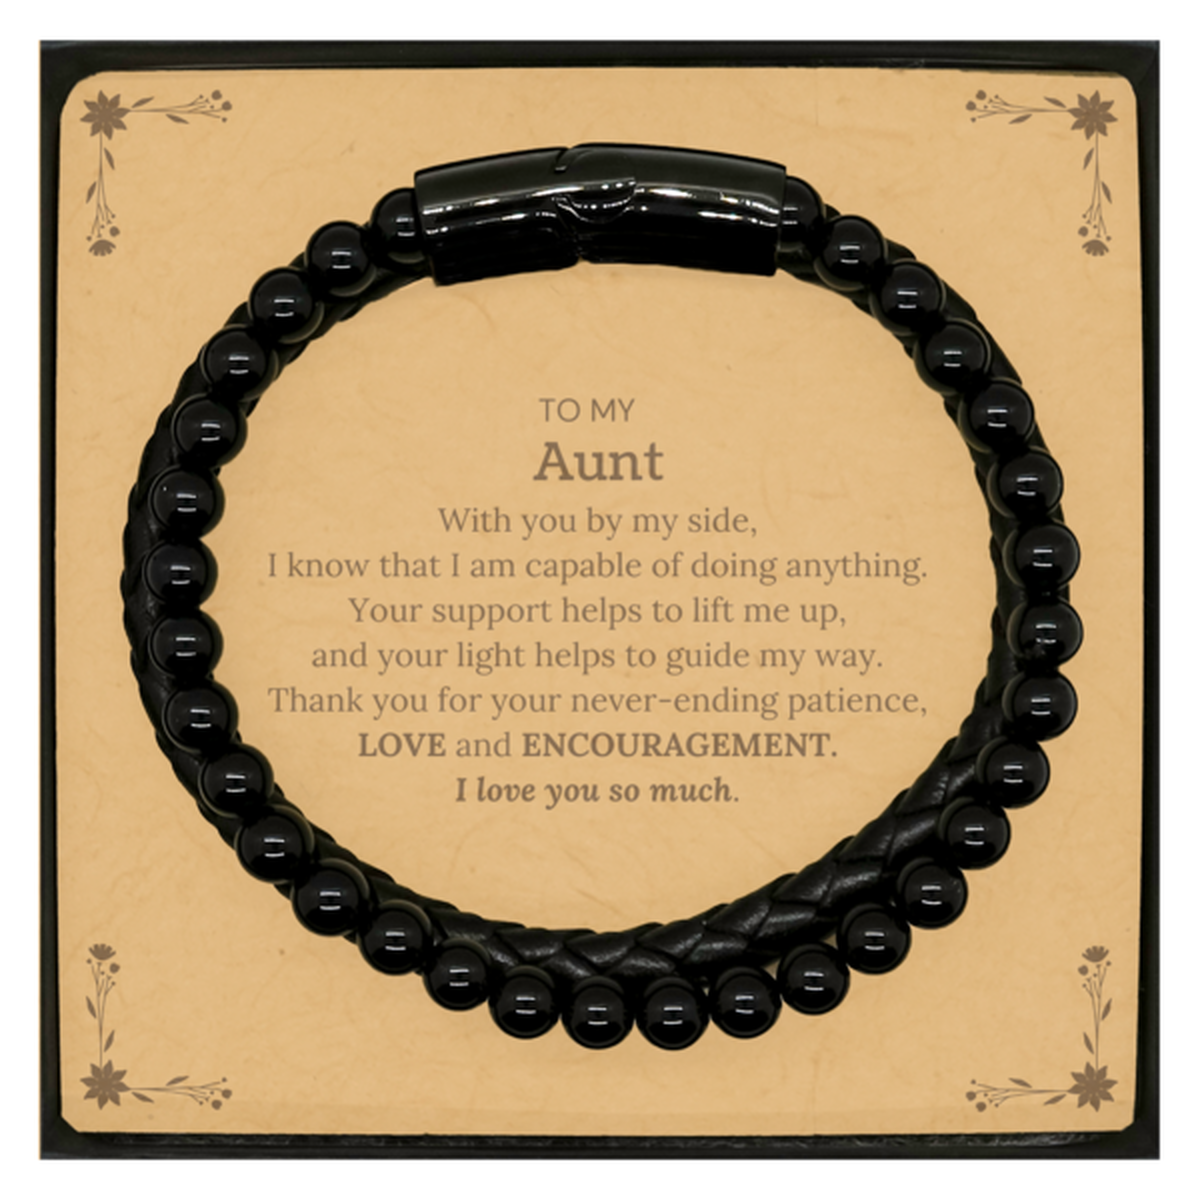 Appreciation Aunt Stone Leather Bracelets Gifts, To My Aunt Birthday Christmas Wedding Keepsake Gifts for Aunt With you by my side, I know that I am capable of doing anything. I love you so much